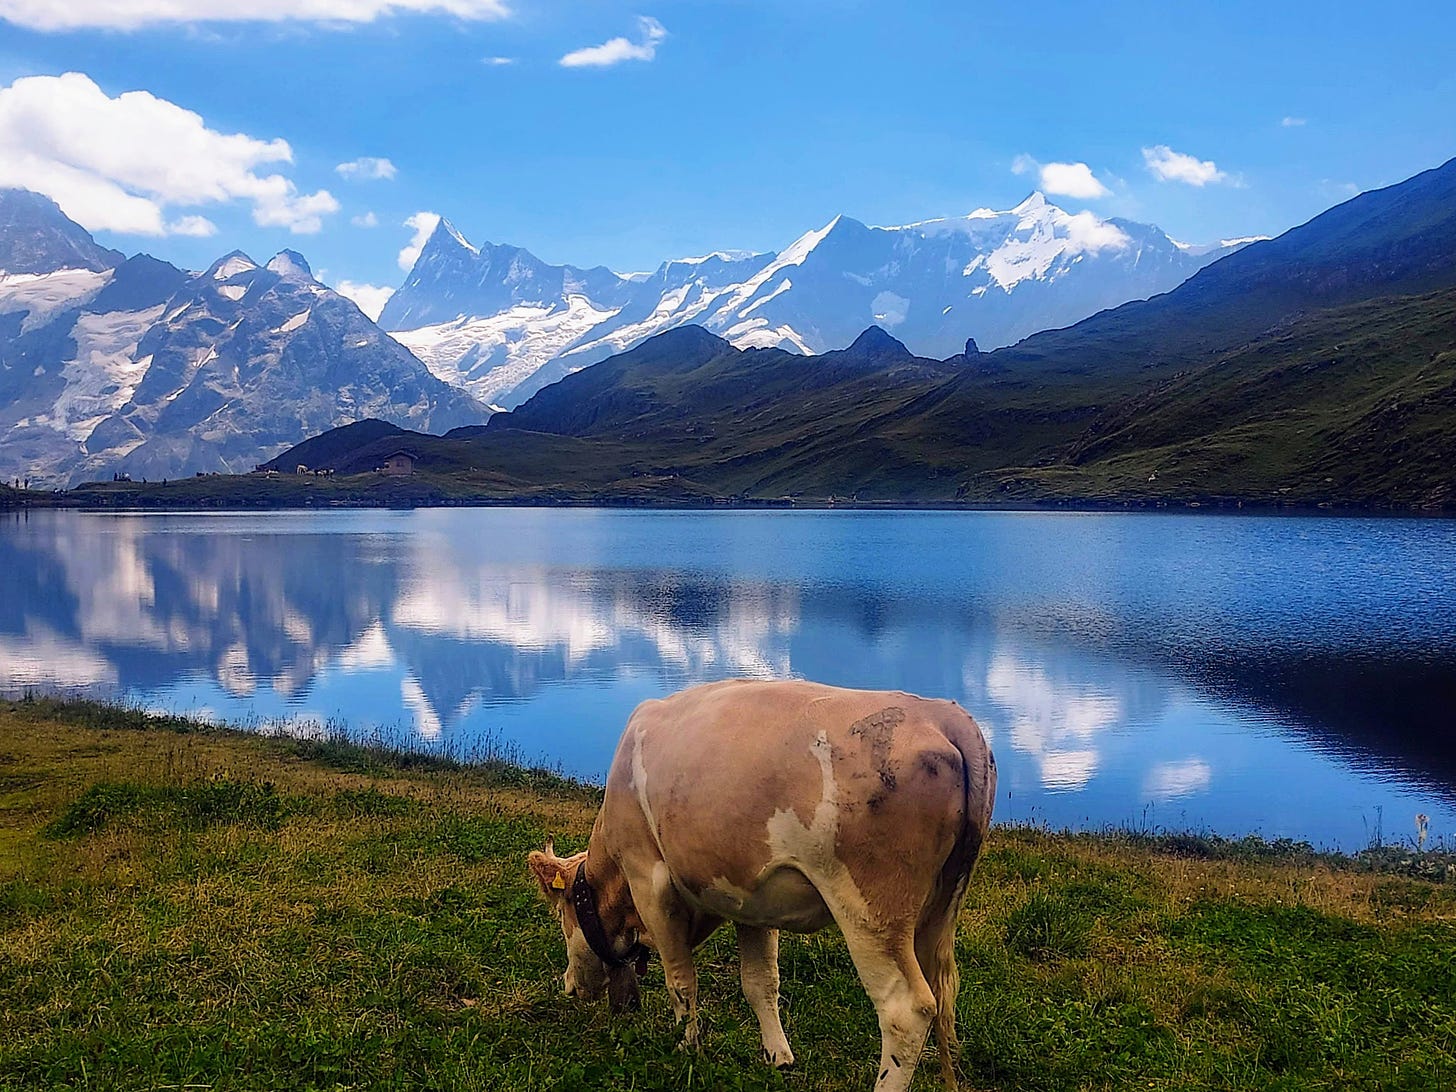 A brown cow grazes near a lake reflecting blue sky and distant mountains.